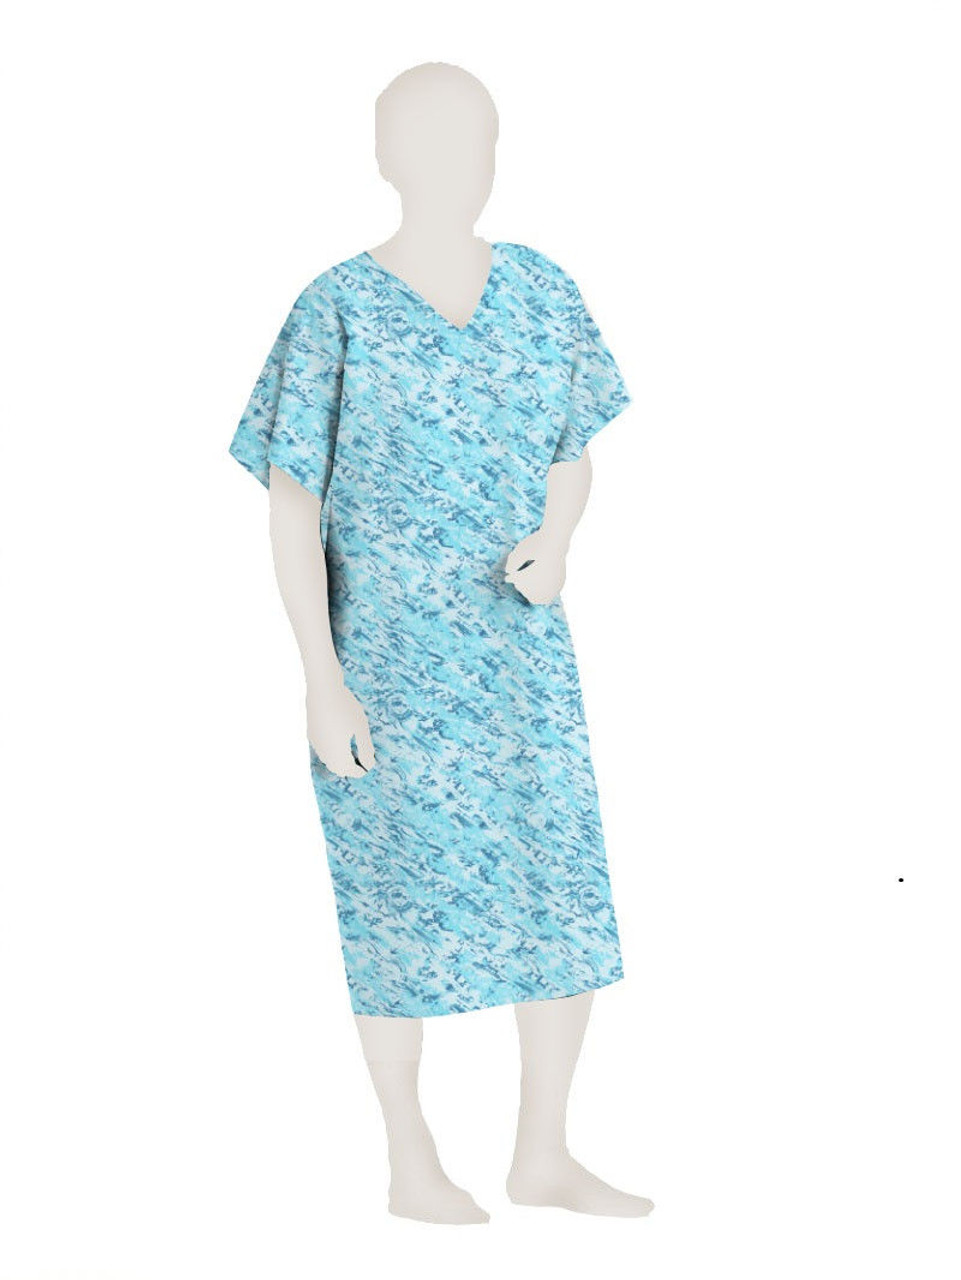 Scrim Reinforced Exam Gowns (Extended Wear/X-Ray) - BH Medwear